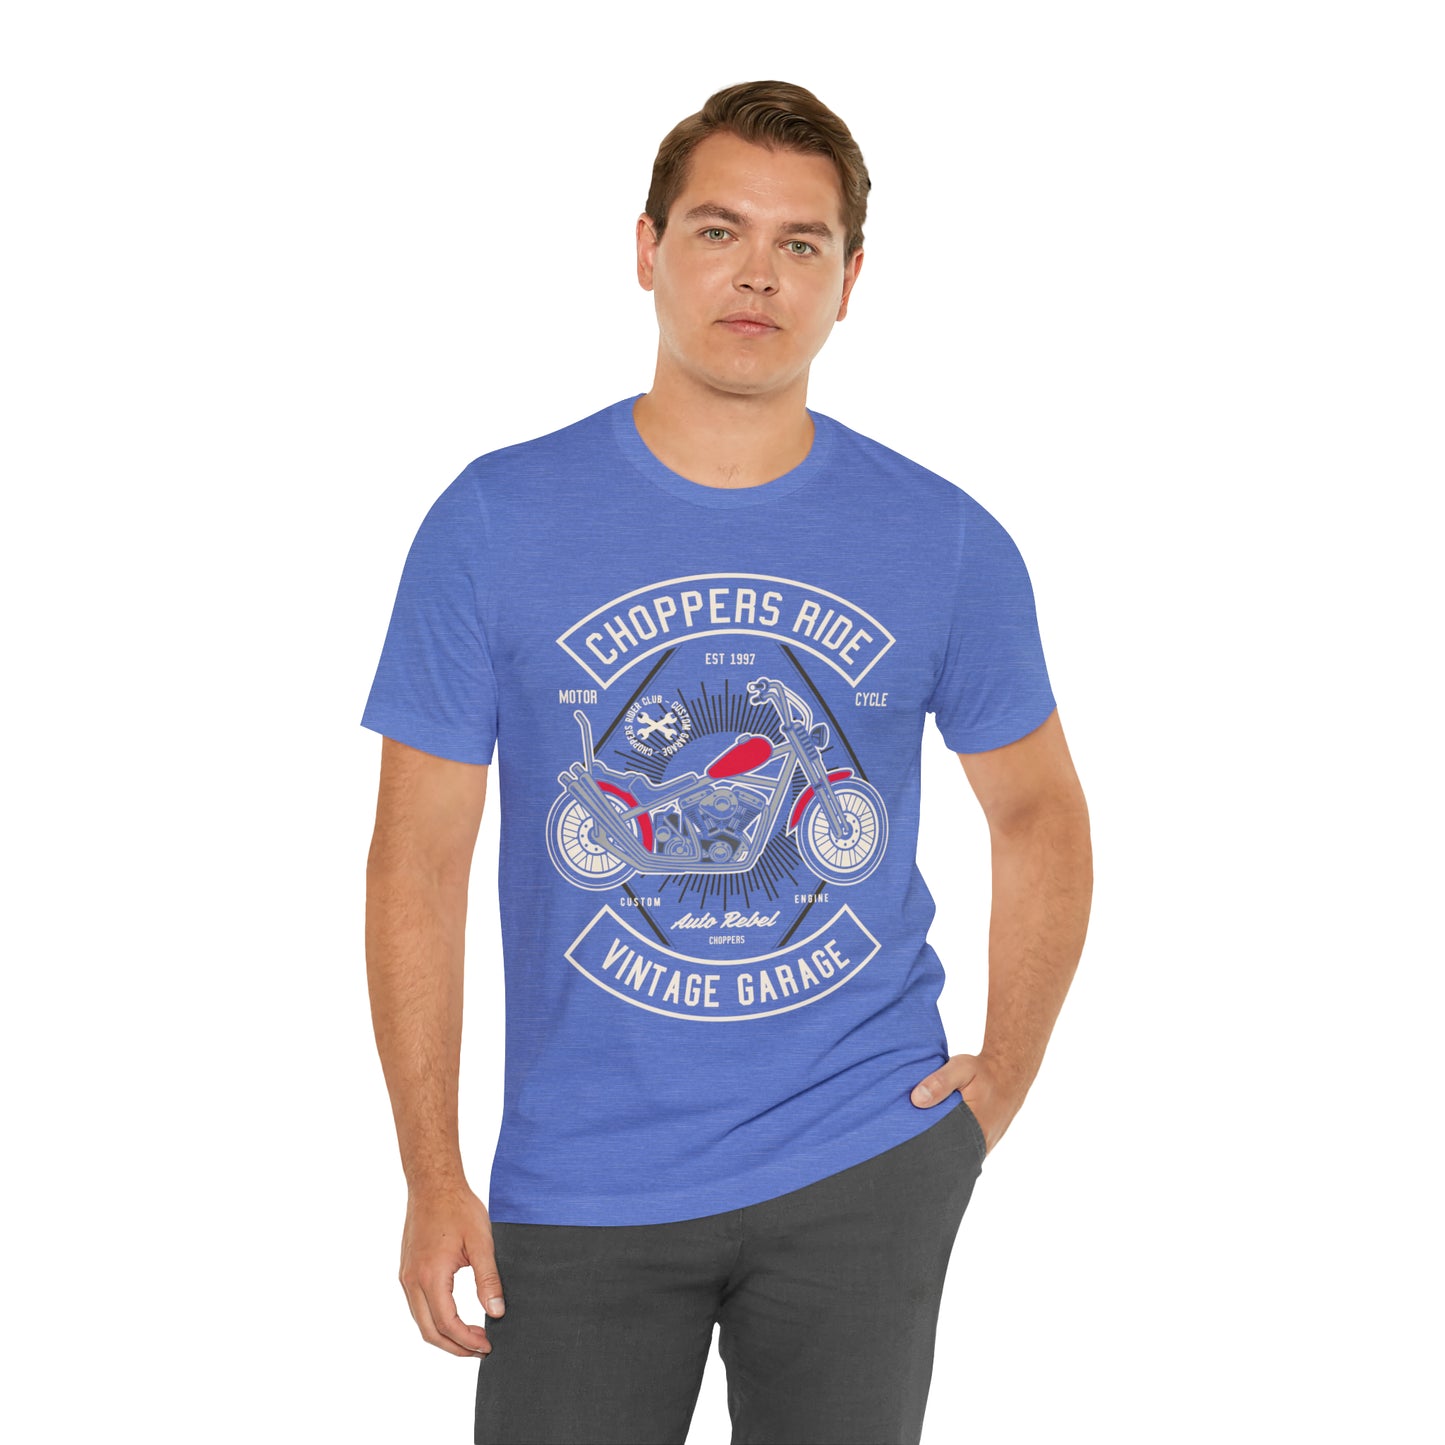 CHOPPERS RIDE Vintage Classic - Unisex Jersey Short Sleeve Tee